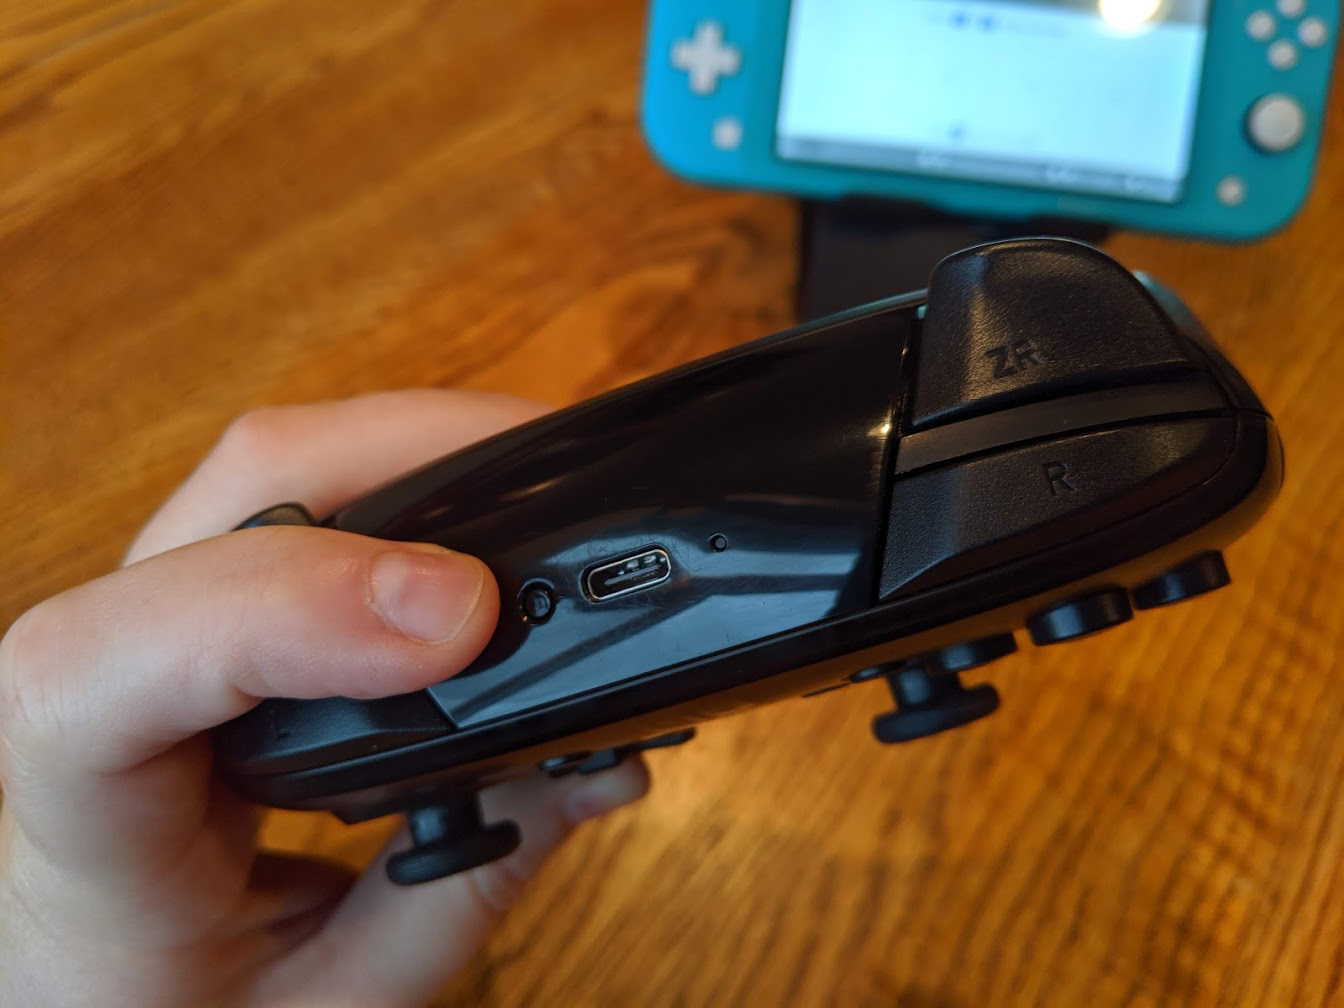 How to pair Pro Controllers to Nintendo Switch Lite: hold the small button at the top of the controller by the USB-C port for three seconds or until paired